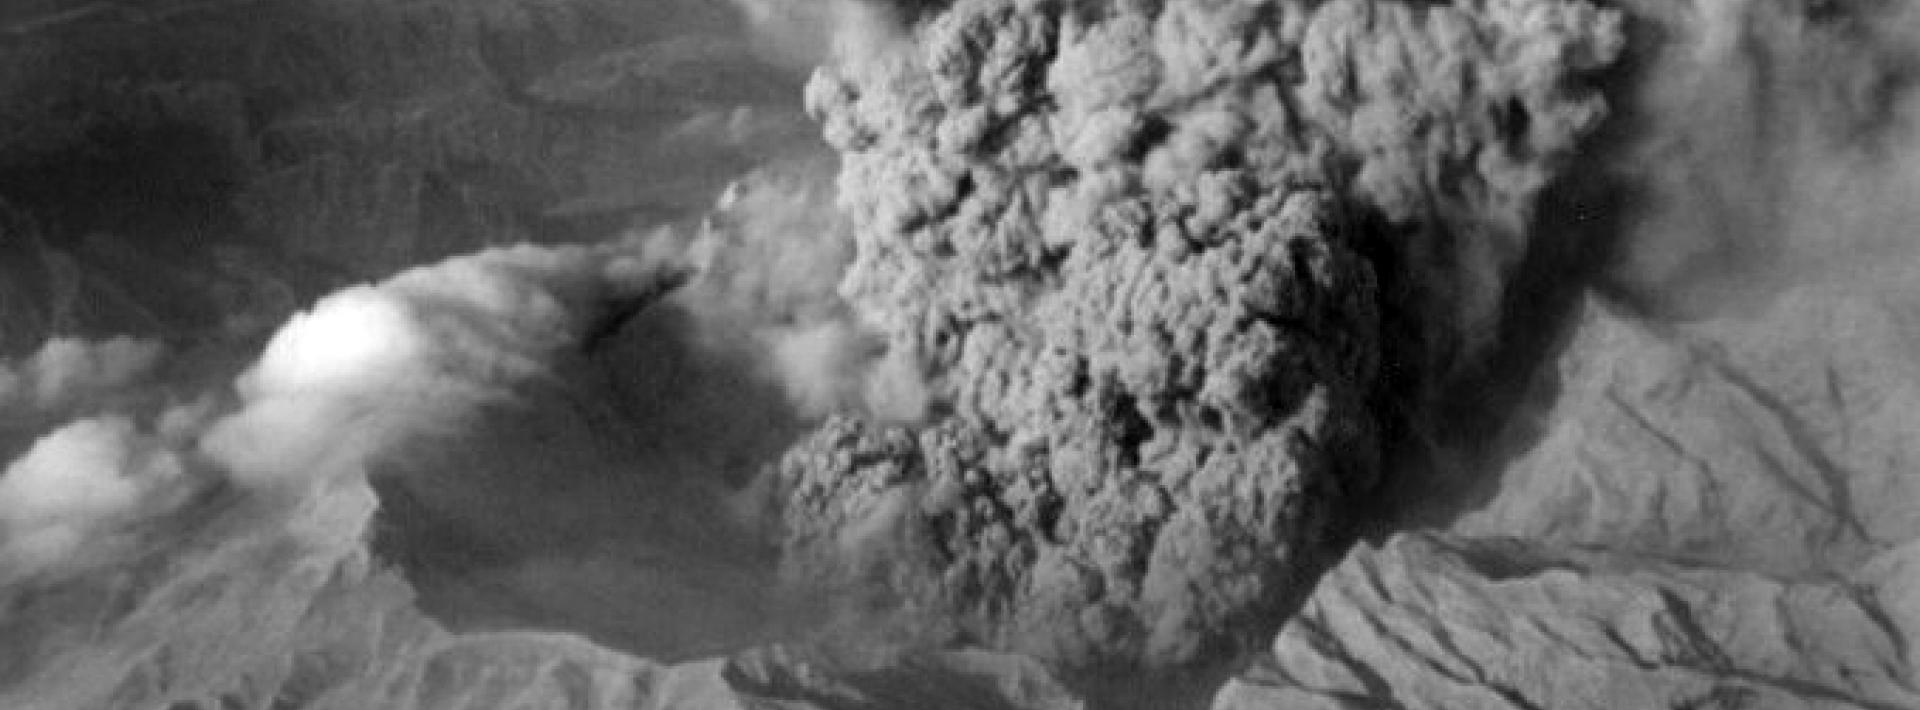 Eruption Lahar And Resilience The Aftermath Of Mt Pinatubo Eruption In The Philippines 8870